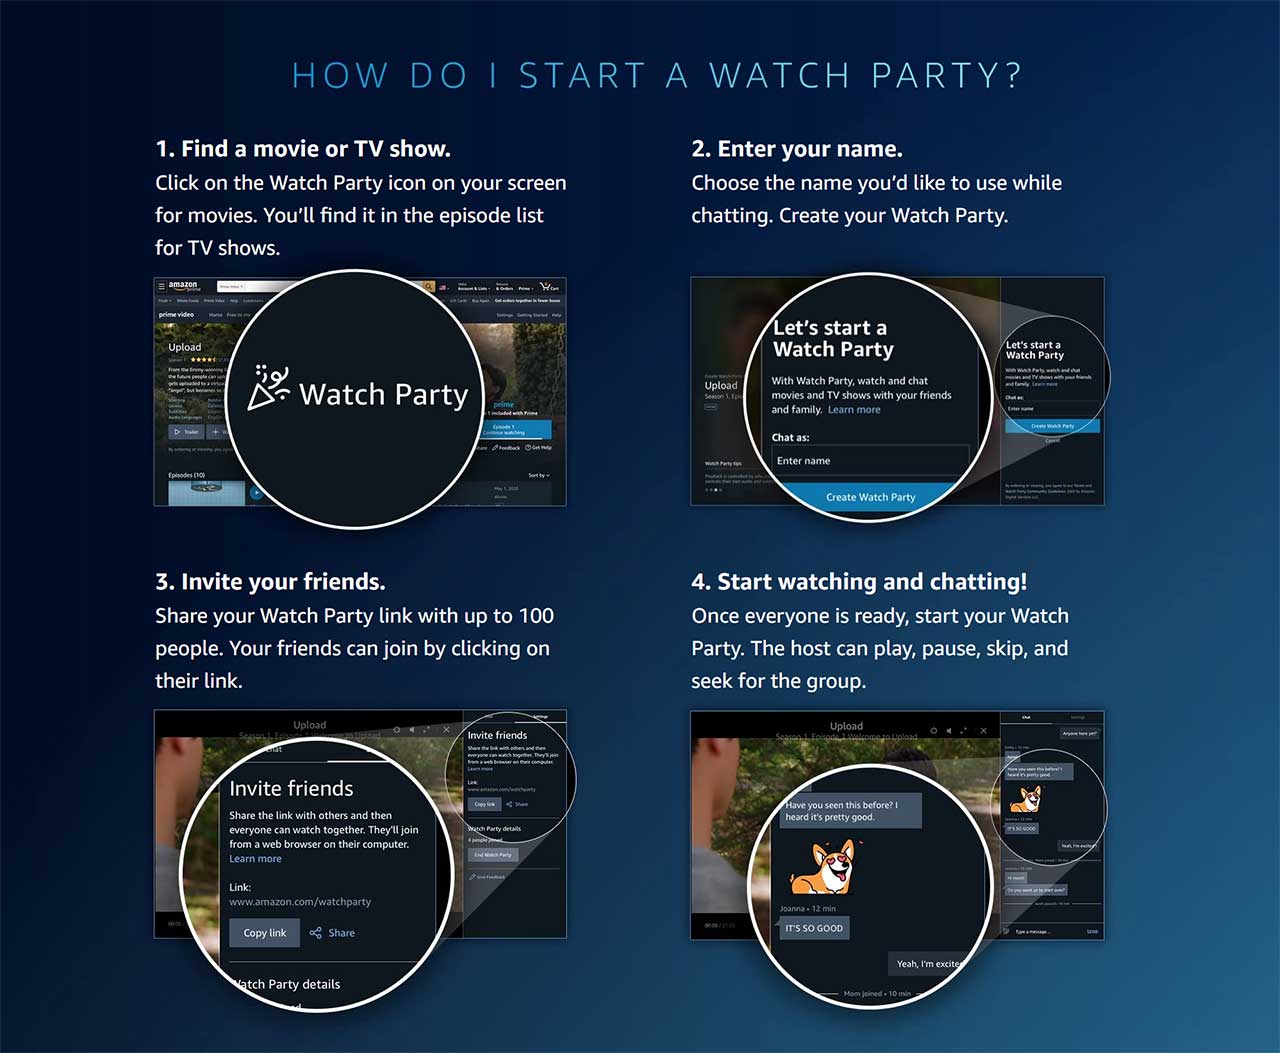 Prime Video Watch Party: How to watch Prime Video with all